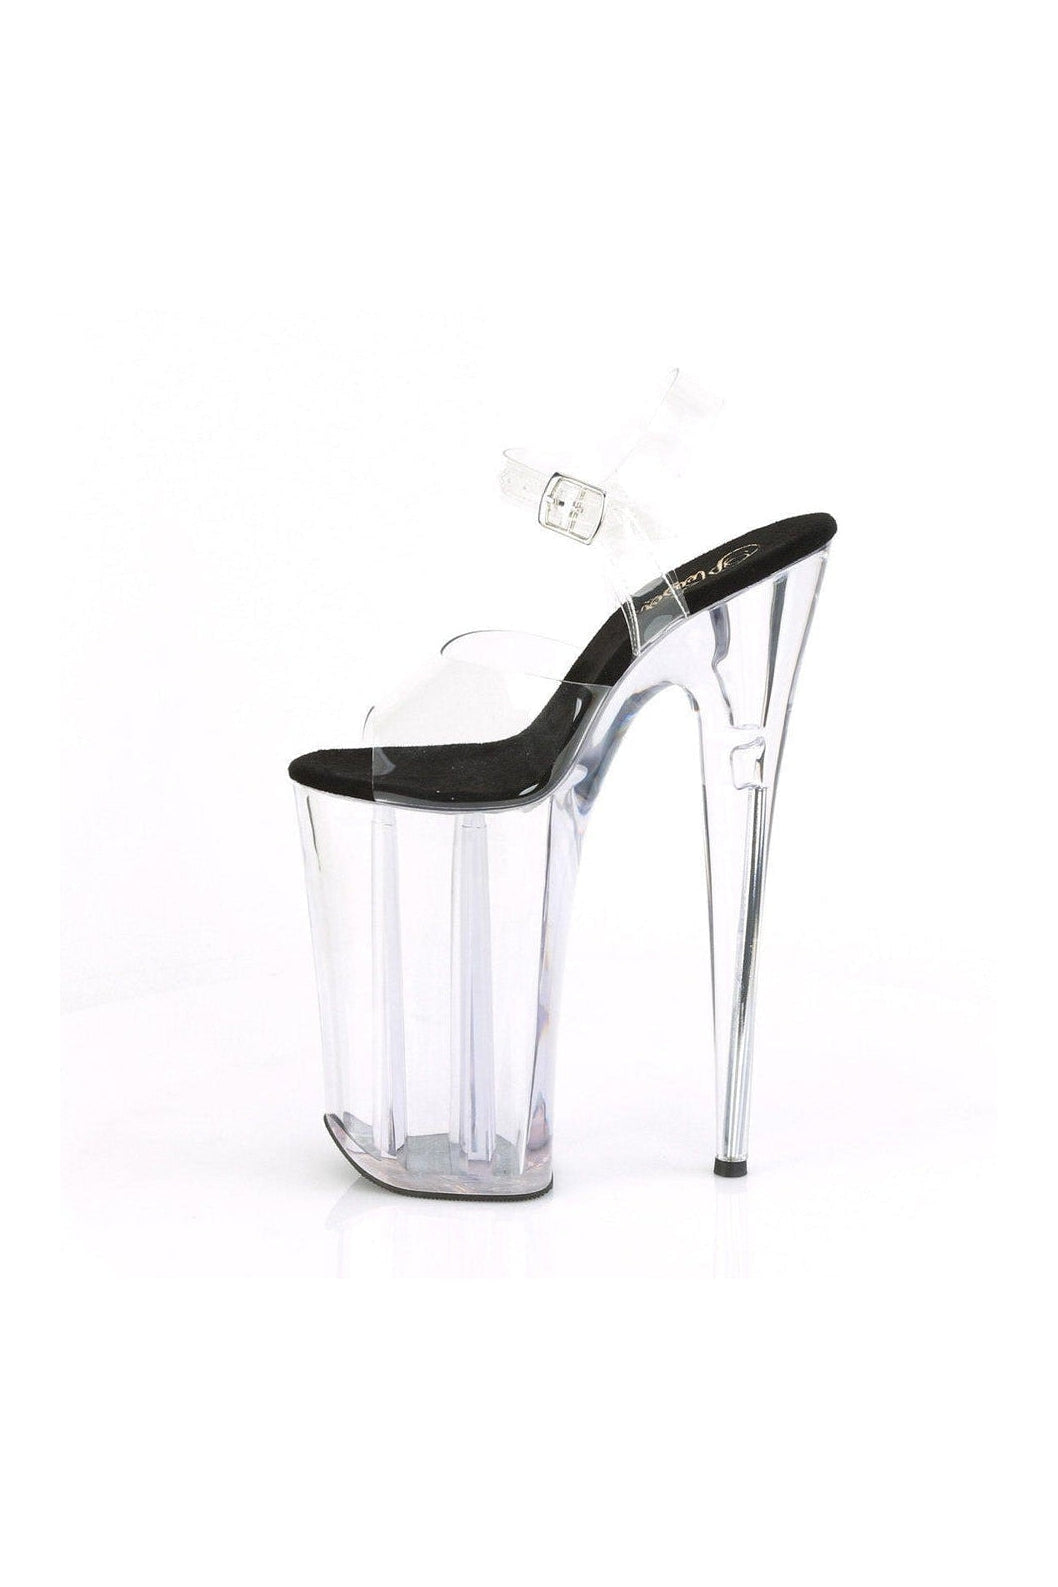 BEYOND-008 Exotic Sandal | Clear Vinyl-Sandals- Stripper Shoes at SEXYSHOES.COM